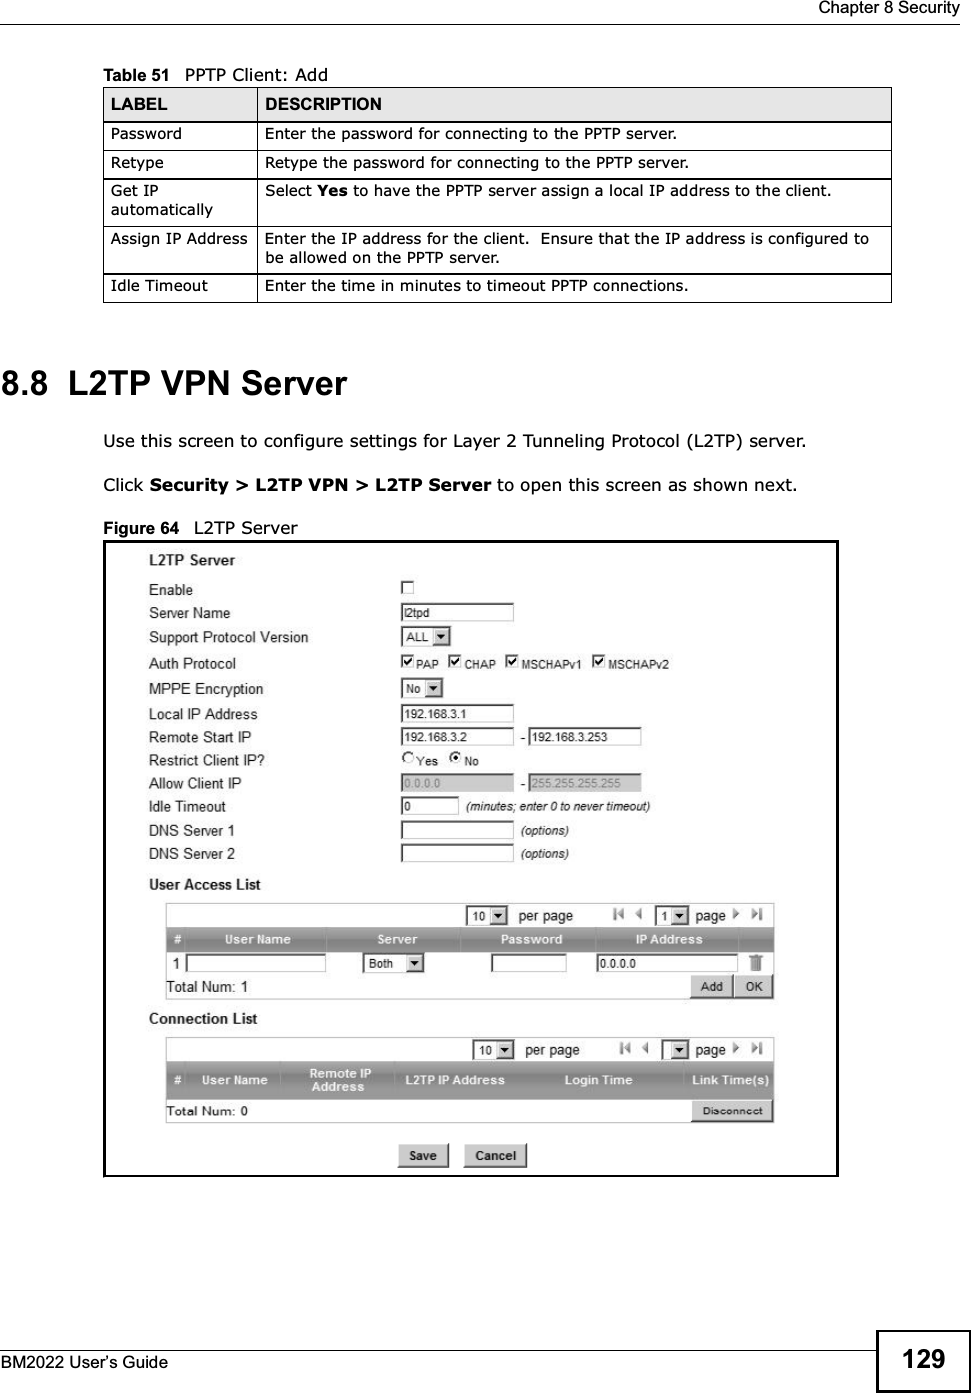  Chapter 8 SecurityBM2022 Users Guide 1298.8  L2TP VPN ServerUse this screen to configure settings for Layer 2 Tunneling Protocol (L2TP) server.Click Security &gt; L2TP VPN &gt; L2TP Server to open this screen as shown next.Figure 64   L2TP ServerPassword Enter the password for connecting to the PPTP server.Retype Retype the password for connecting to the PPTP server.Get IP automaticallySelect Yes to have the PPTP server assign a local IP address to the client.Assign IP Address Enter the IP address for the client.  Ensure that the IP address is configured to be allowed on the PPTP server.Idle Timeout Enter the time in minutes to timeout PPTP connections.Table 51   PPTP Client: AddLABEL DESCRIPTION